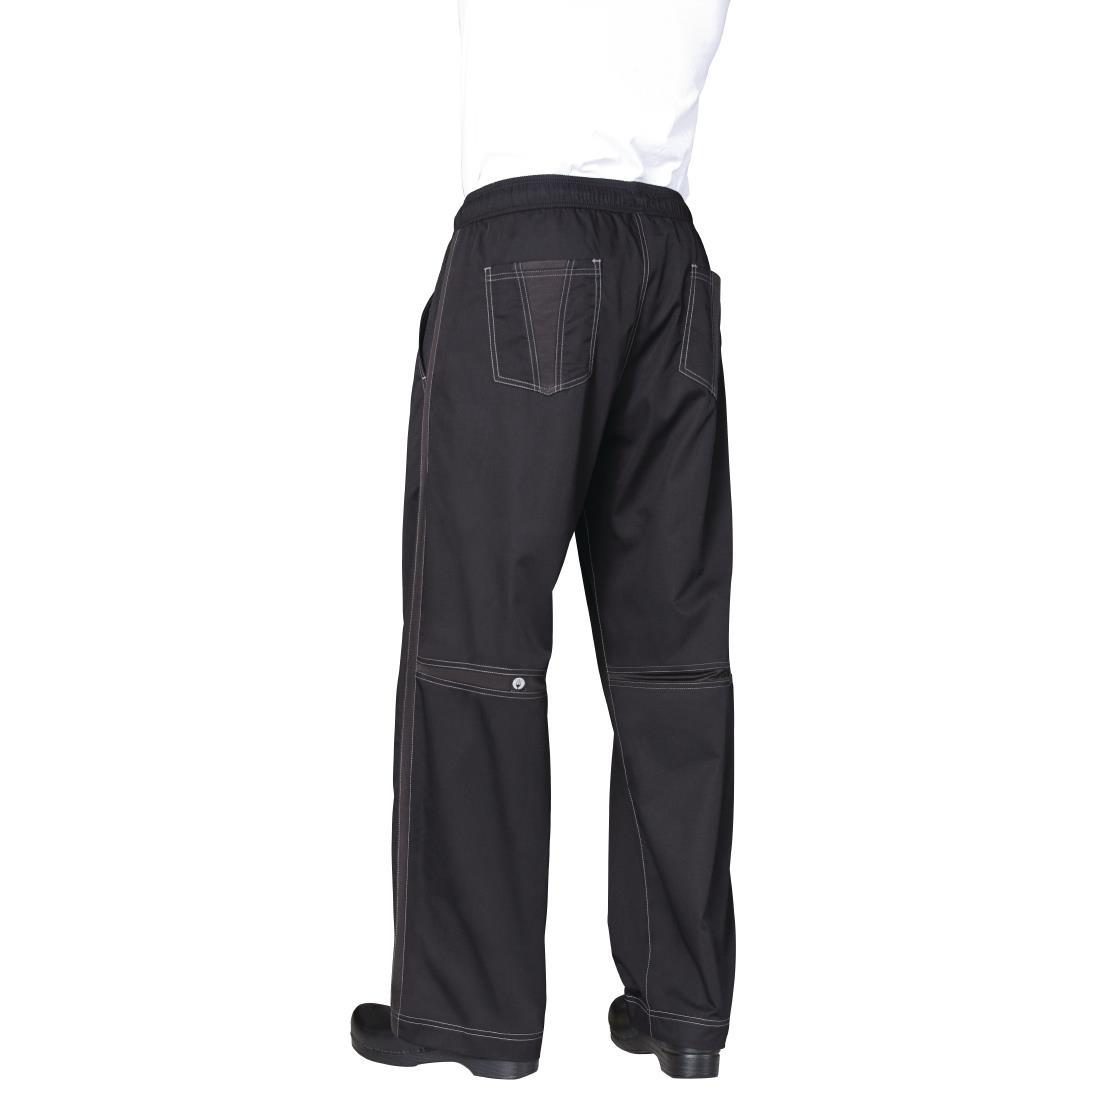 Chef Works Unisex Cool Vent Baggy Chefs Trousers Black M - B187-M  - 2